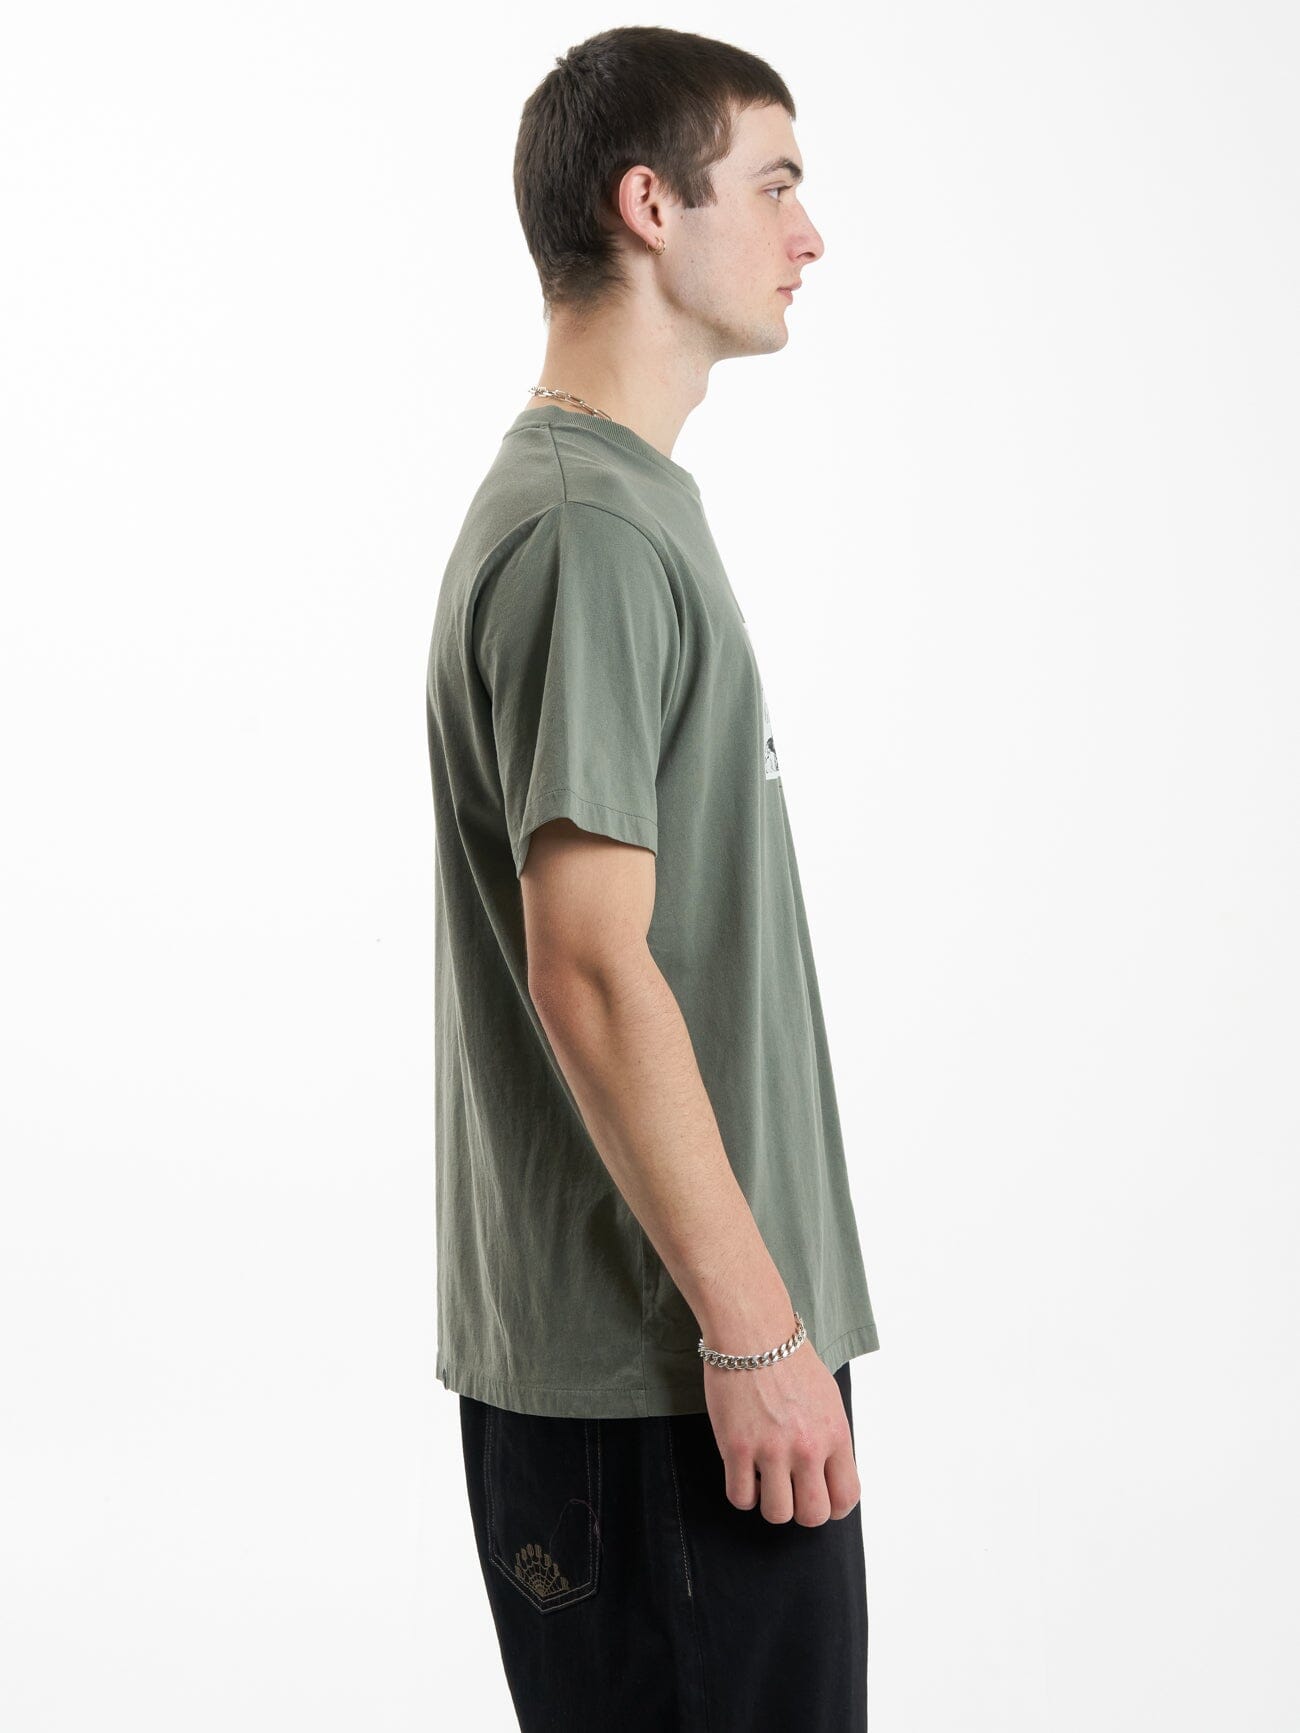 Gravitating Naturally Merch Fit Tee - Thyme